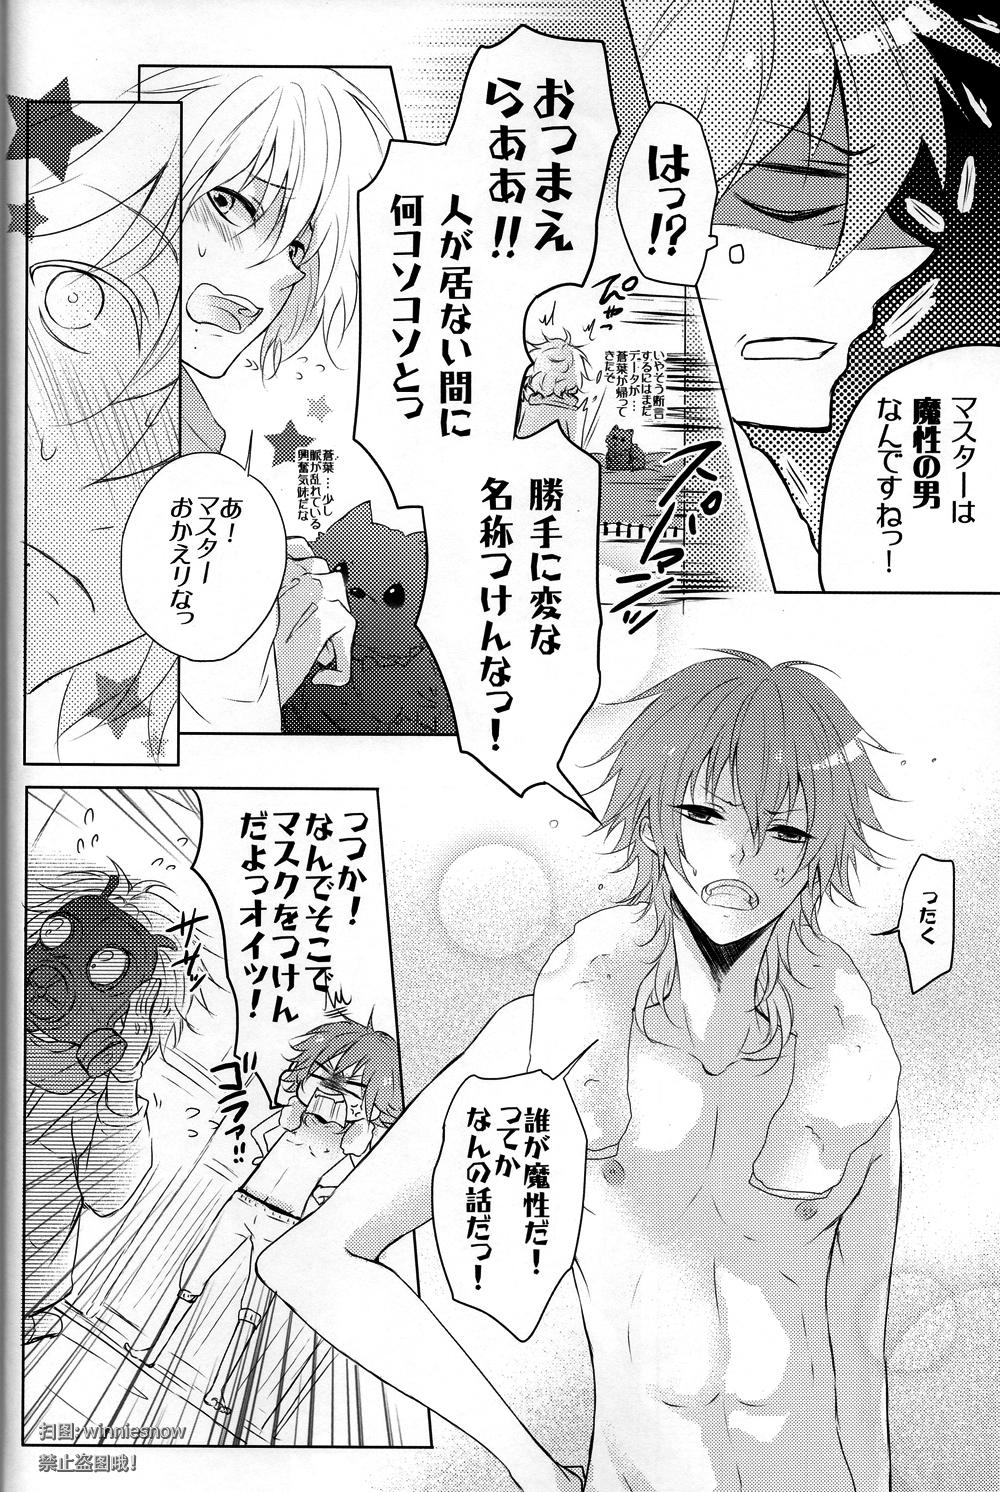 Tiny Tits Porn Honeycomb - Dramatical murder Spreading - Page 3